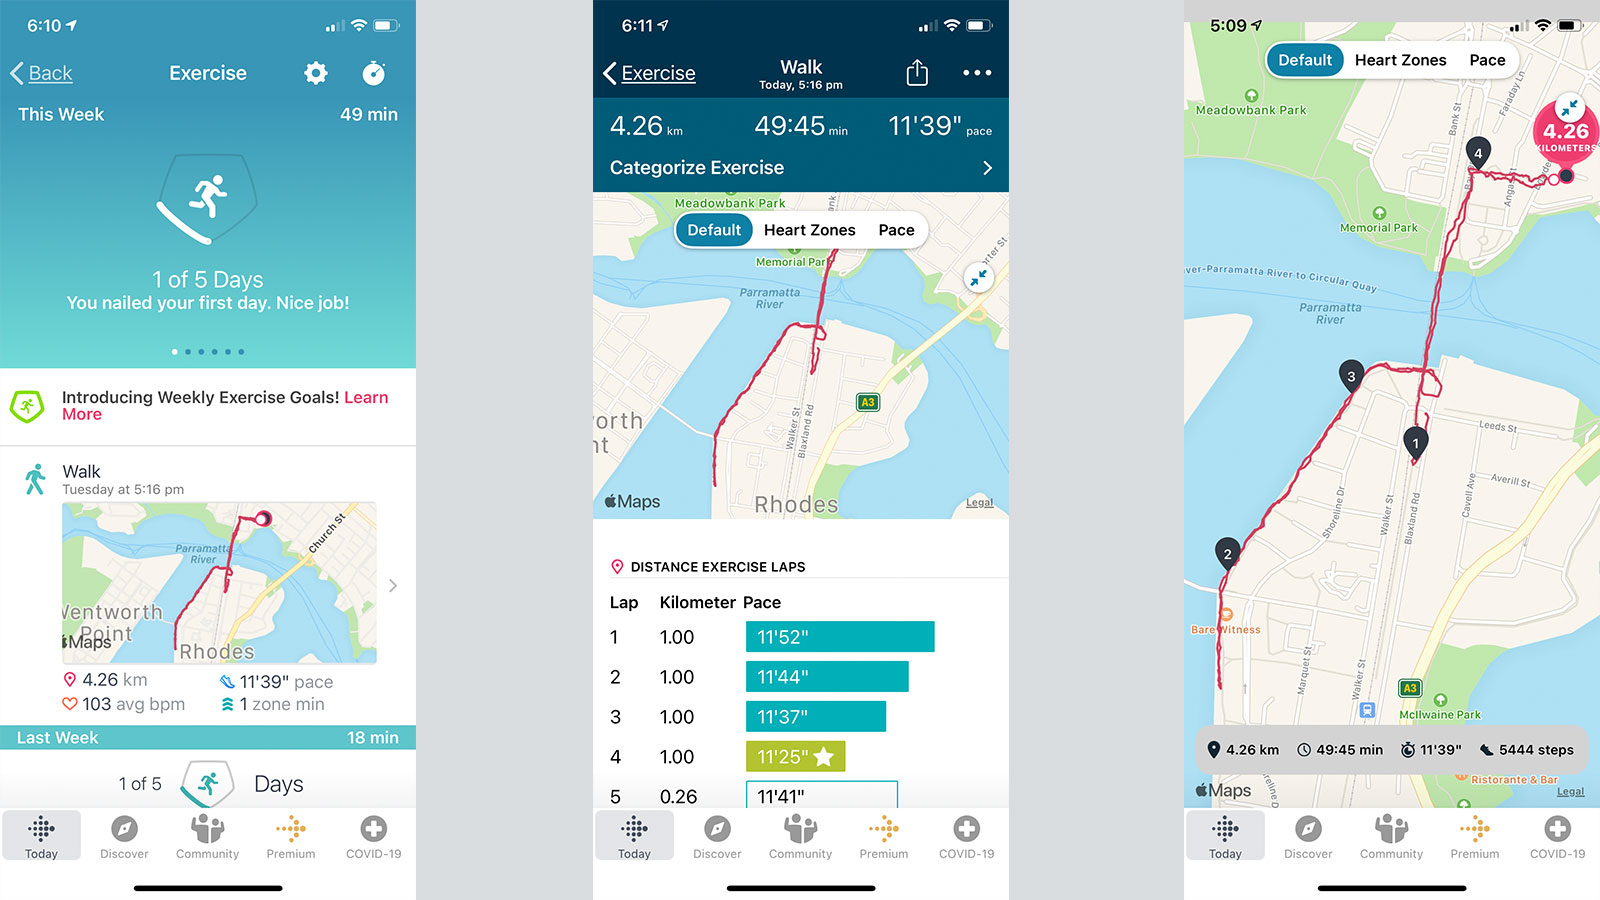 Run tracking stats in the Fitbit mobile app